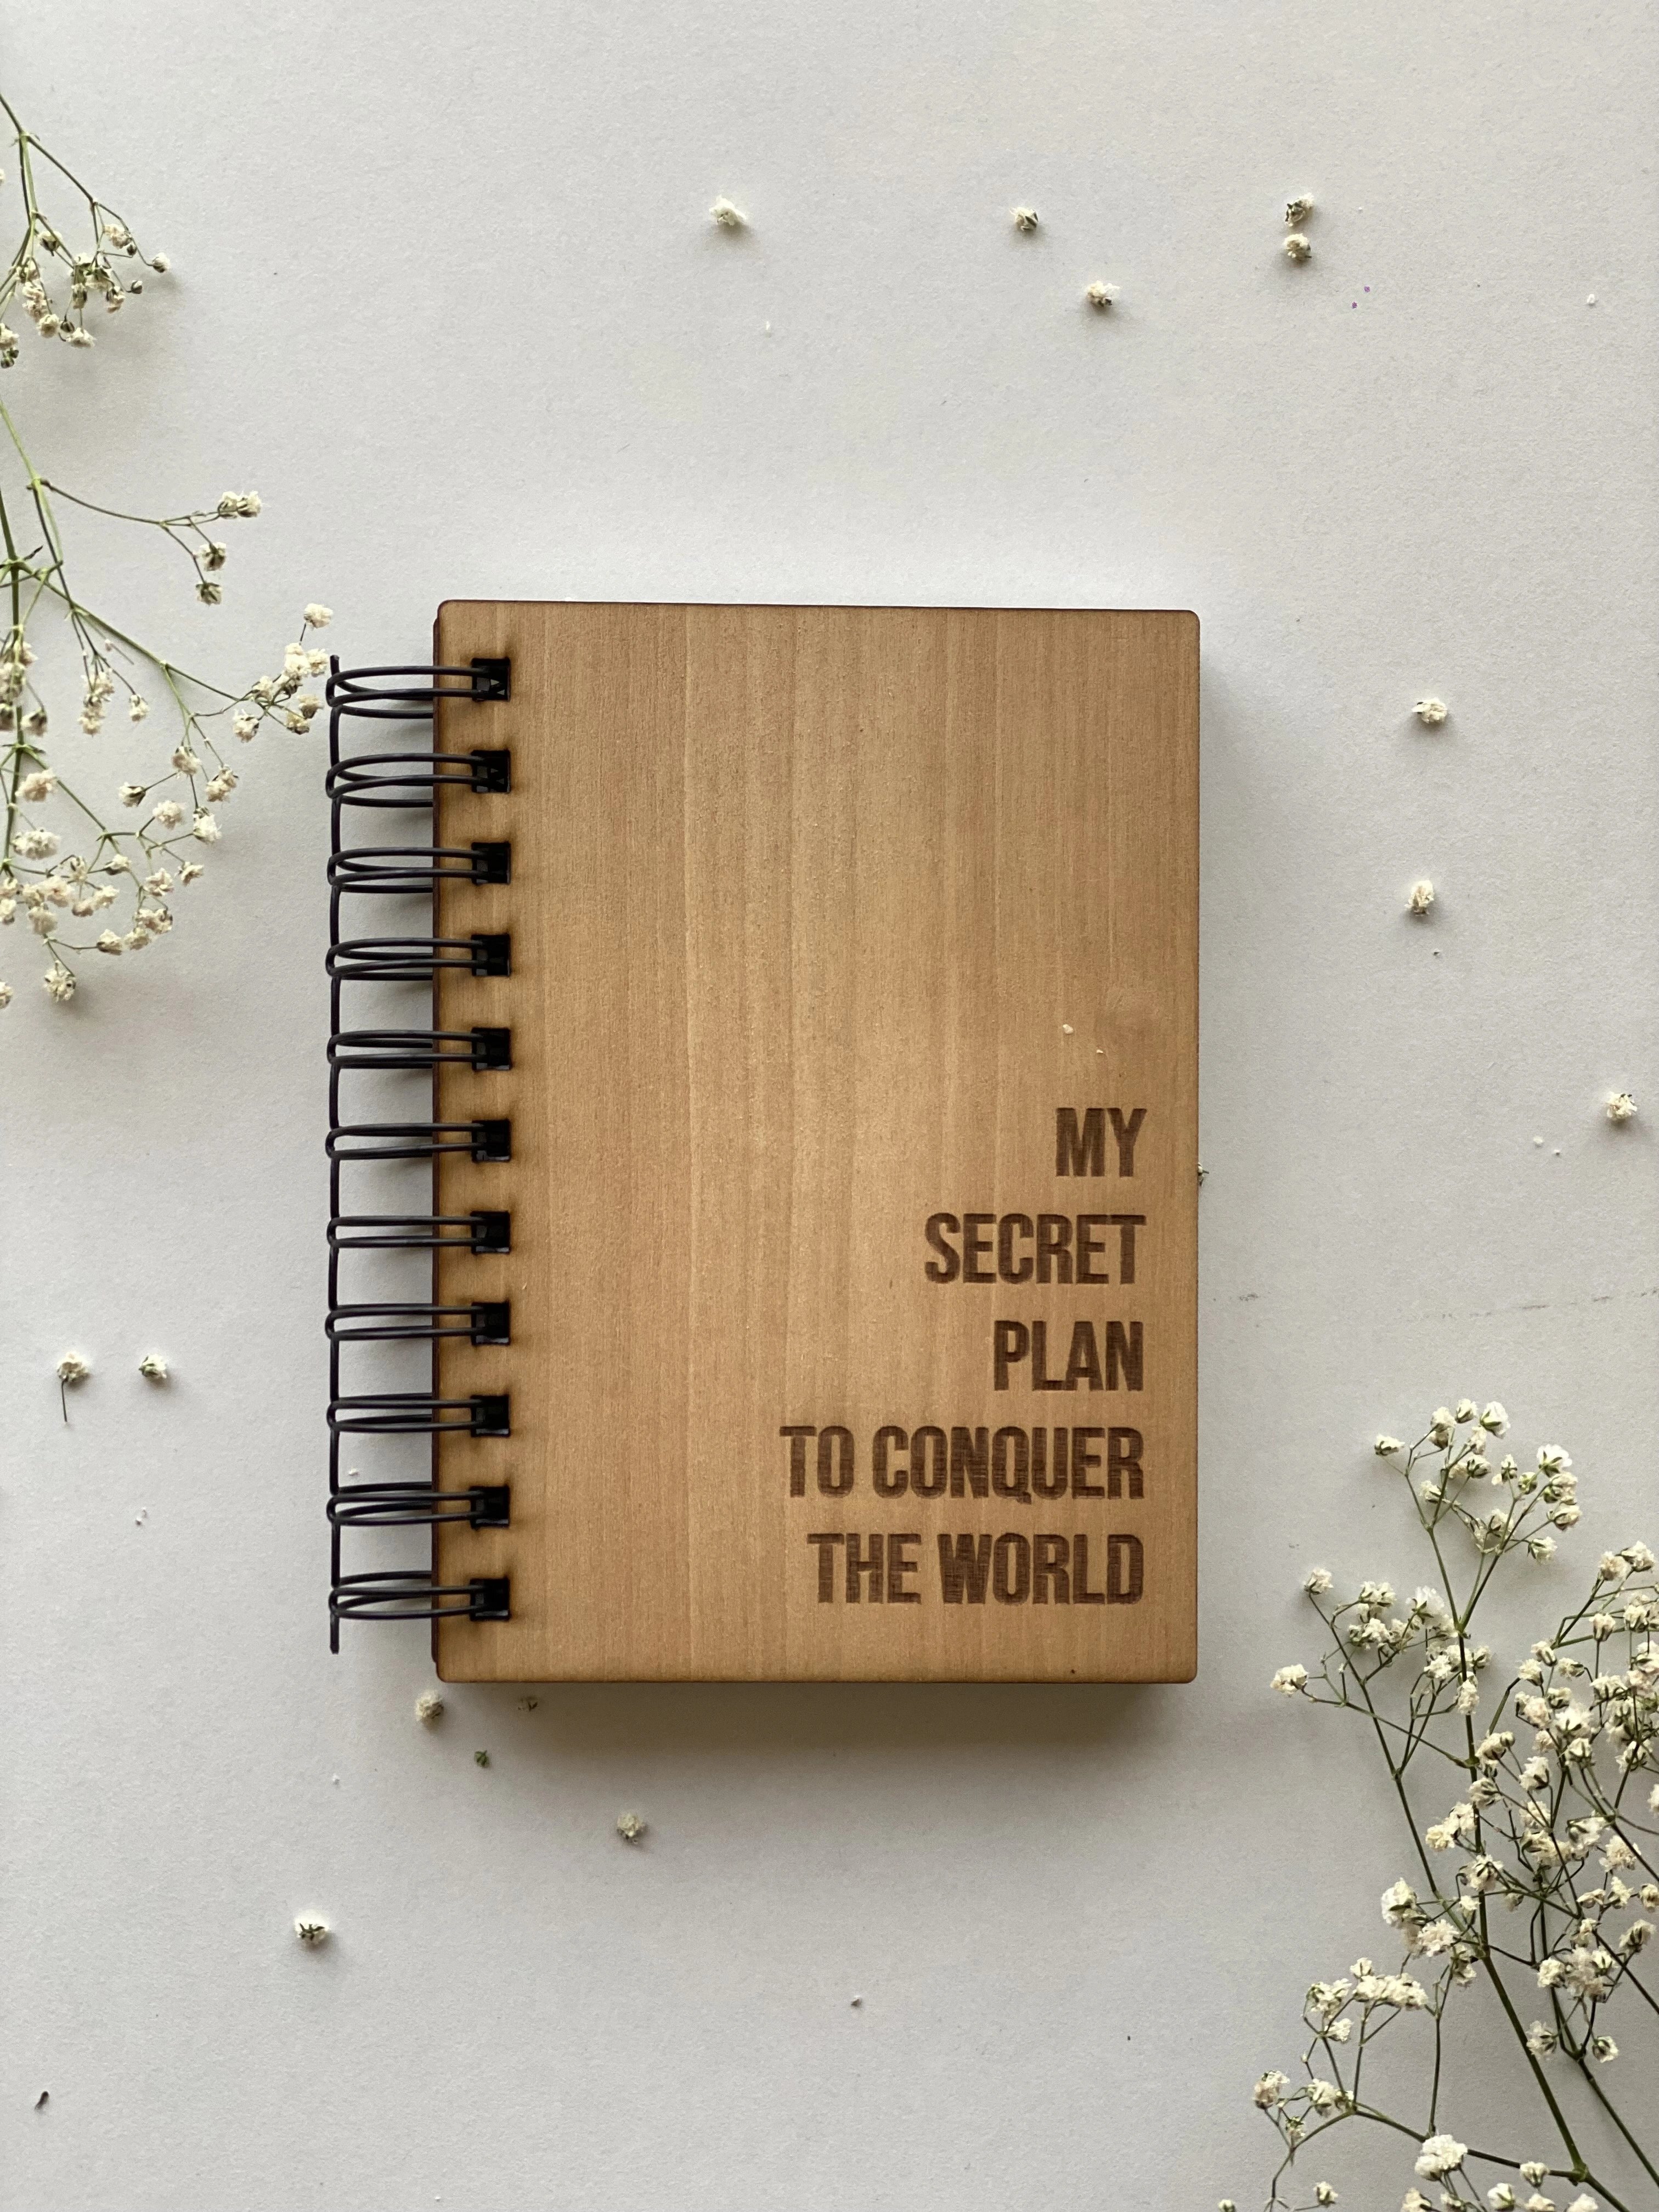 conquer　the　plan　world　Notebook　HappyEveryday　to　secret　My　Wooden